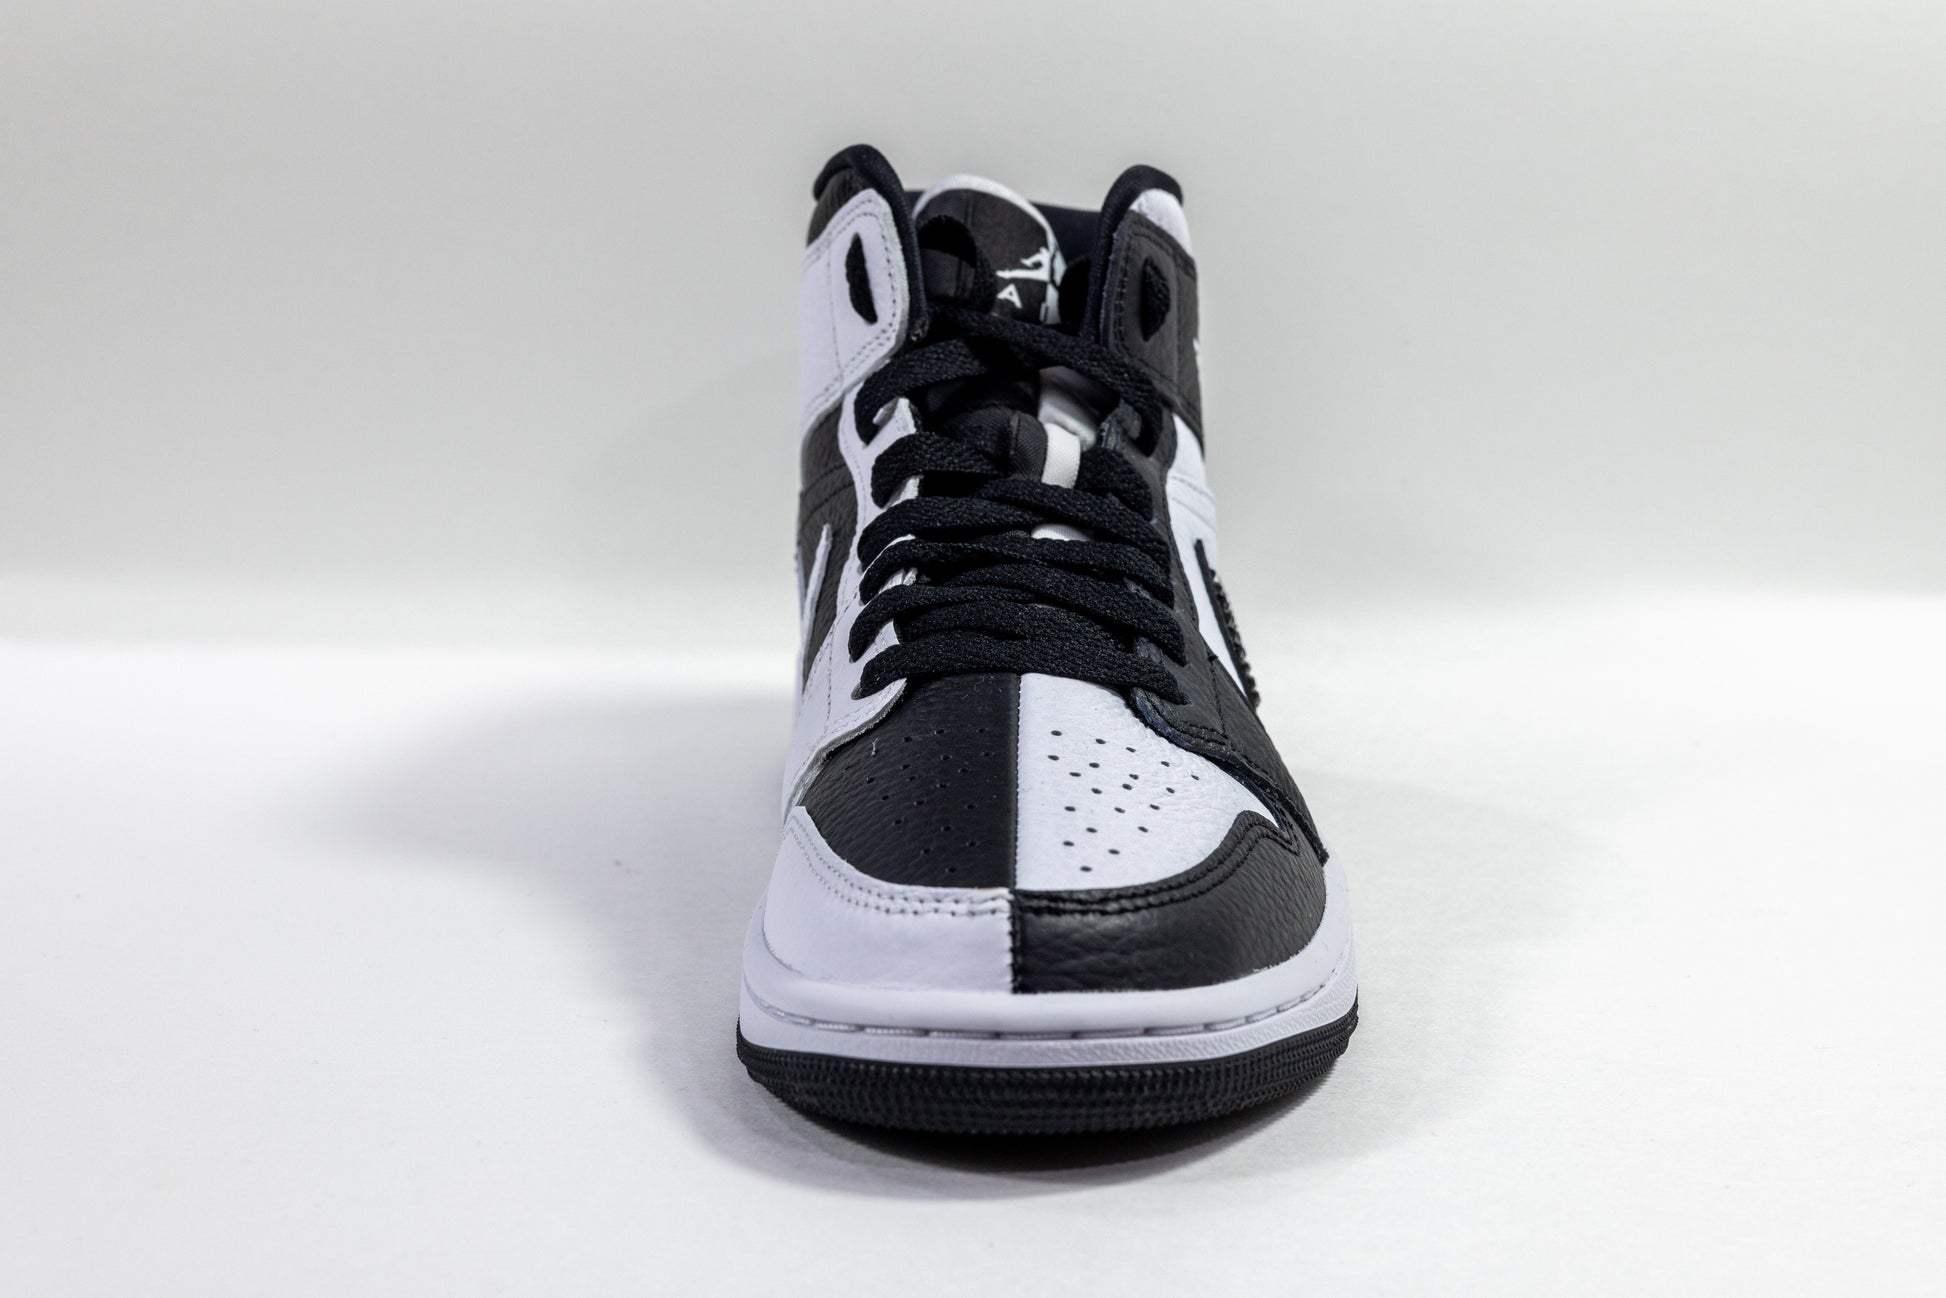 Limited Edition Jordan 1 Mid High Top Sneakers With Swarovski 